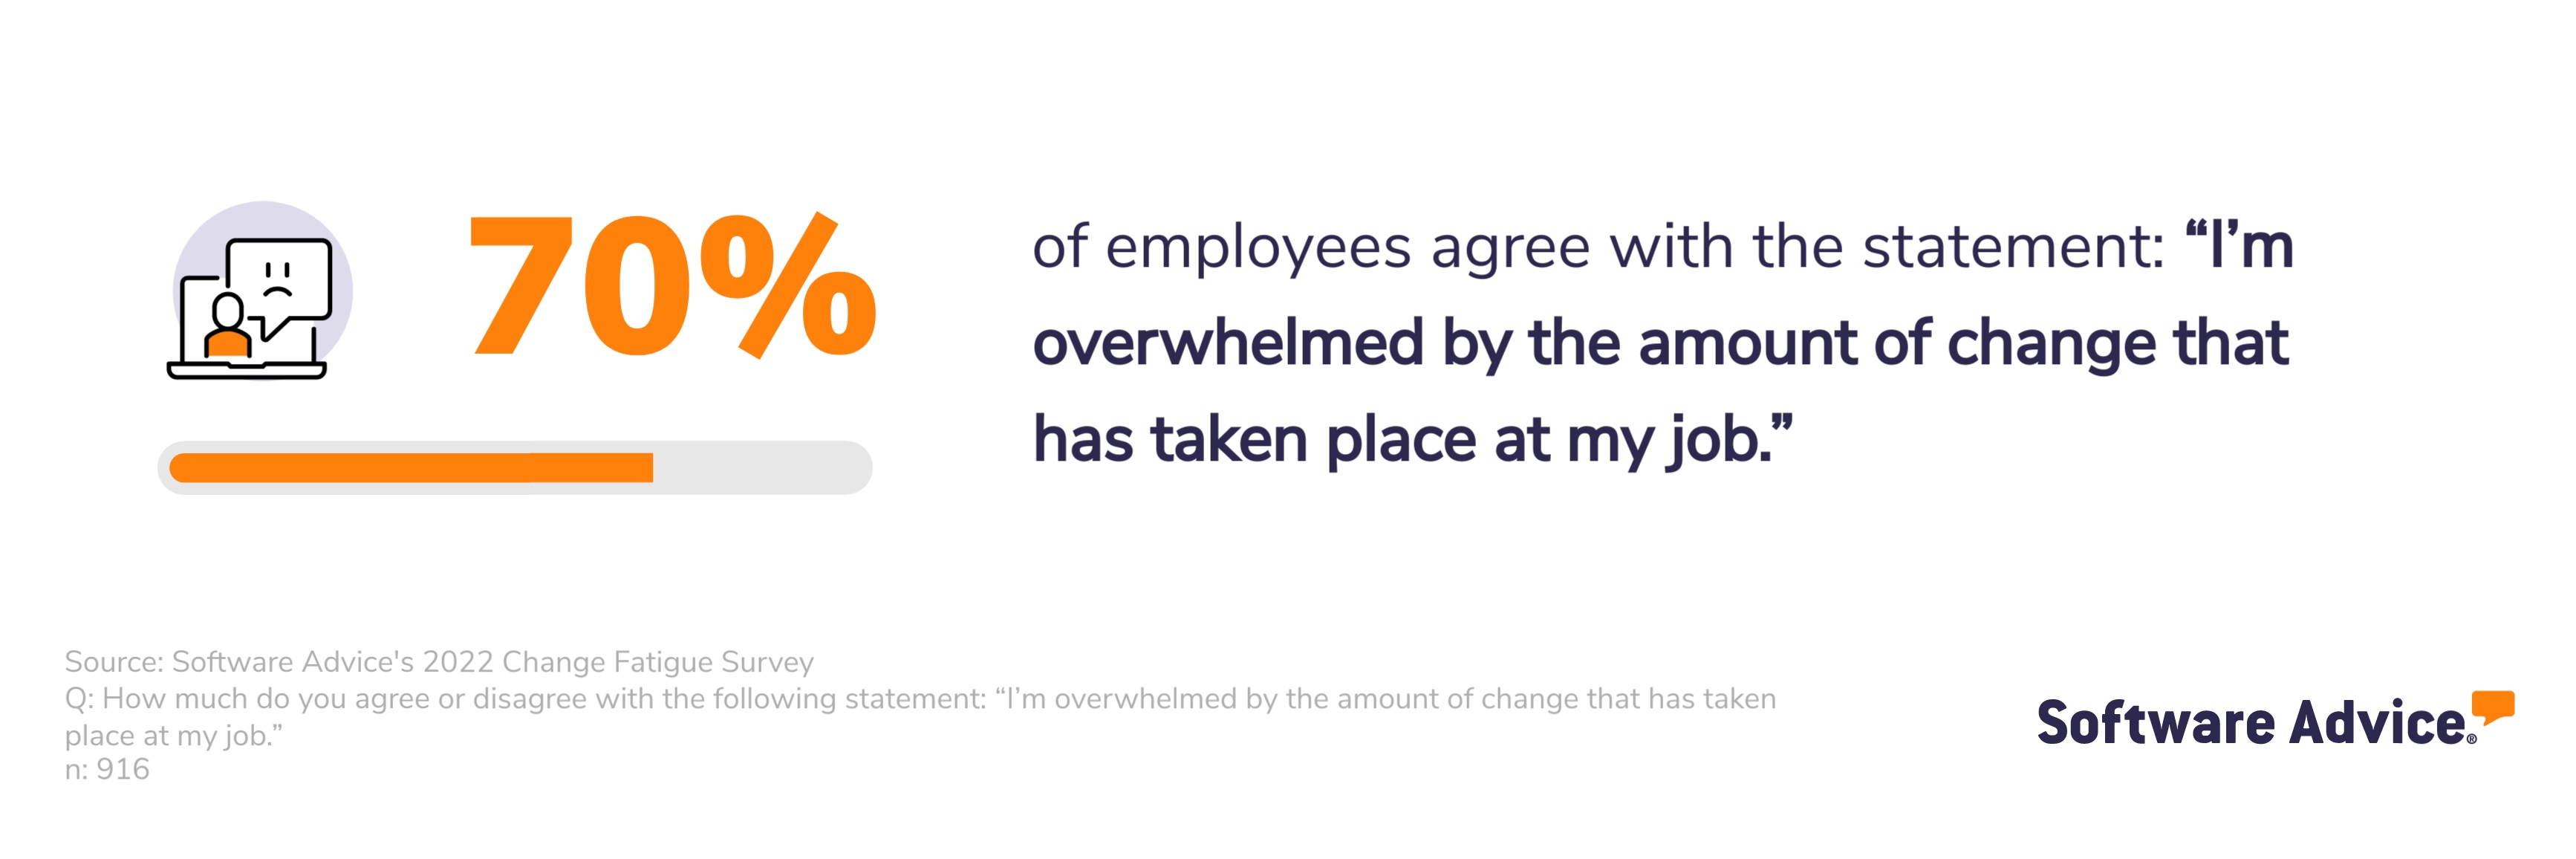 According to a survey* conducted by Software Advice, the majority of employees are overwhelmed by the amount of change that has taken place at their jobs.